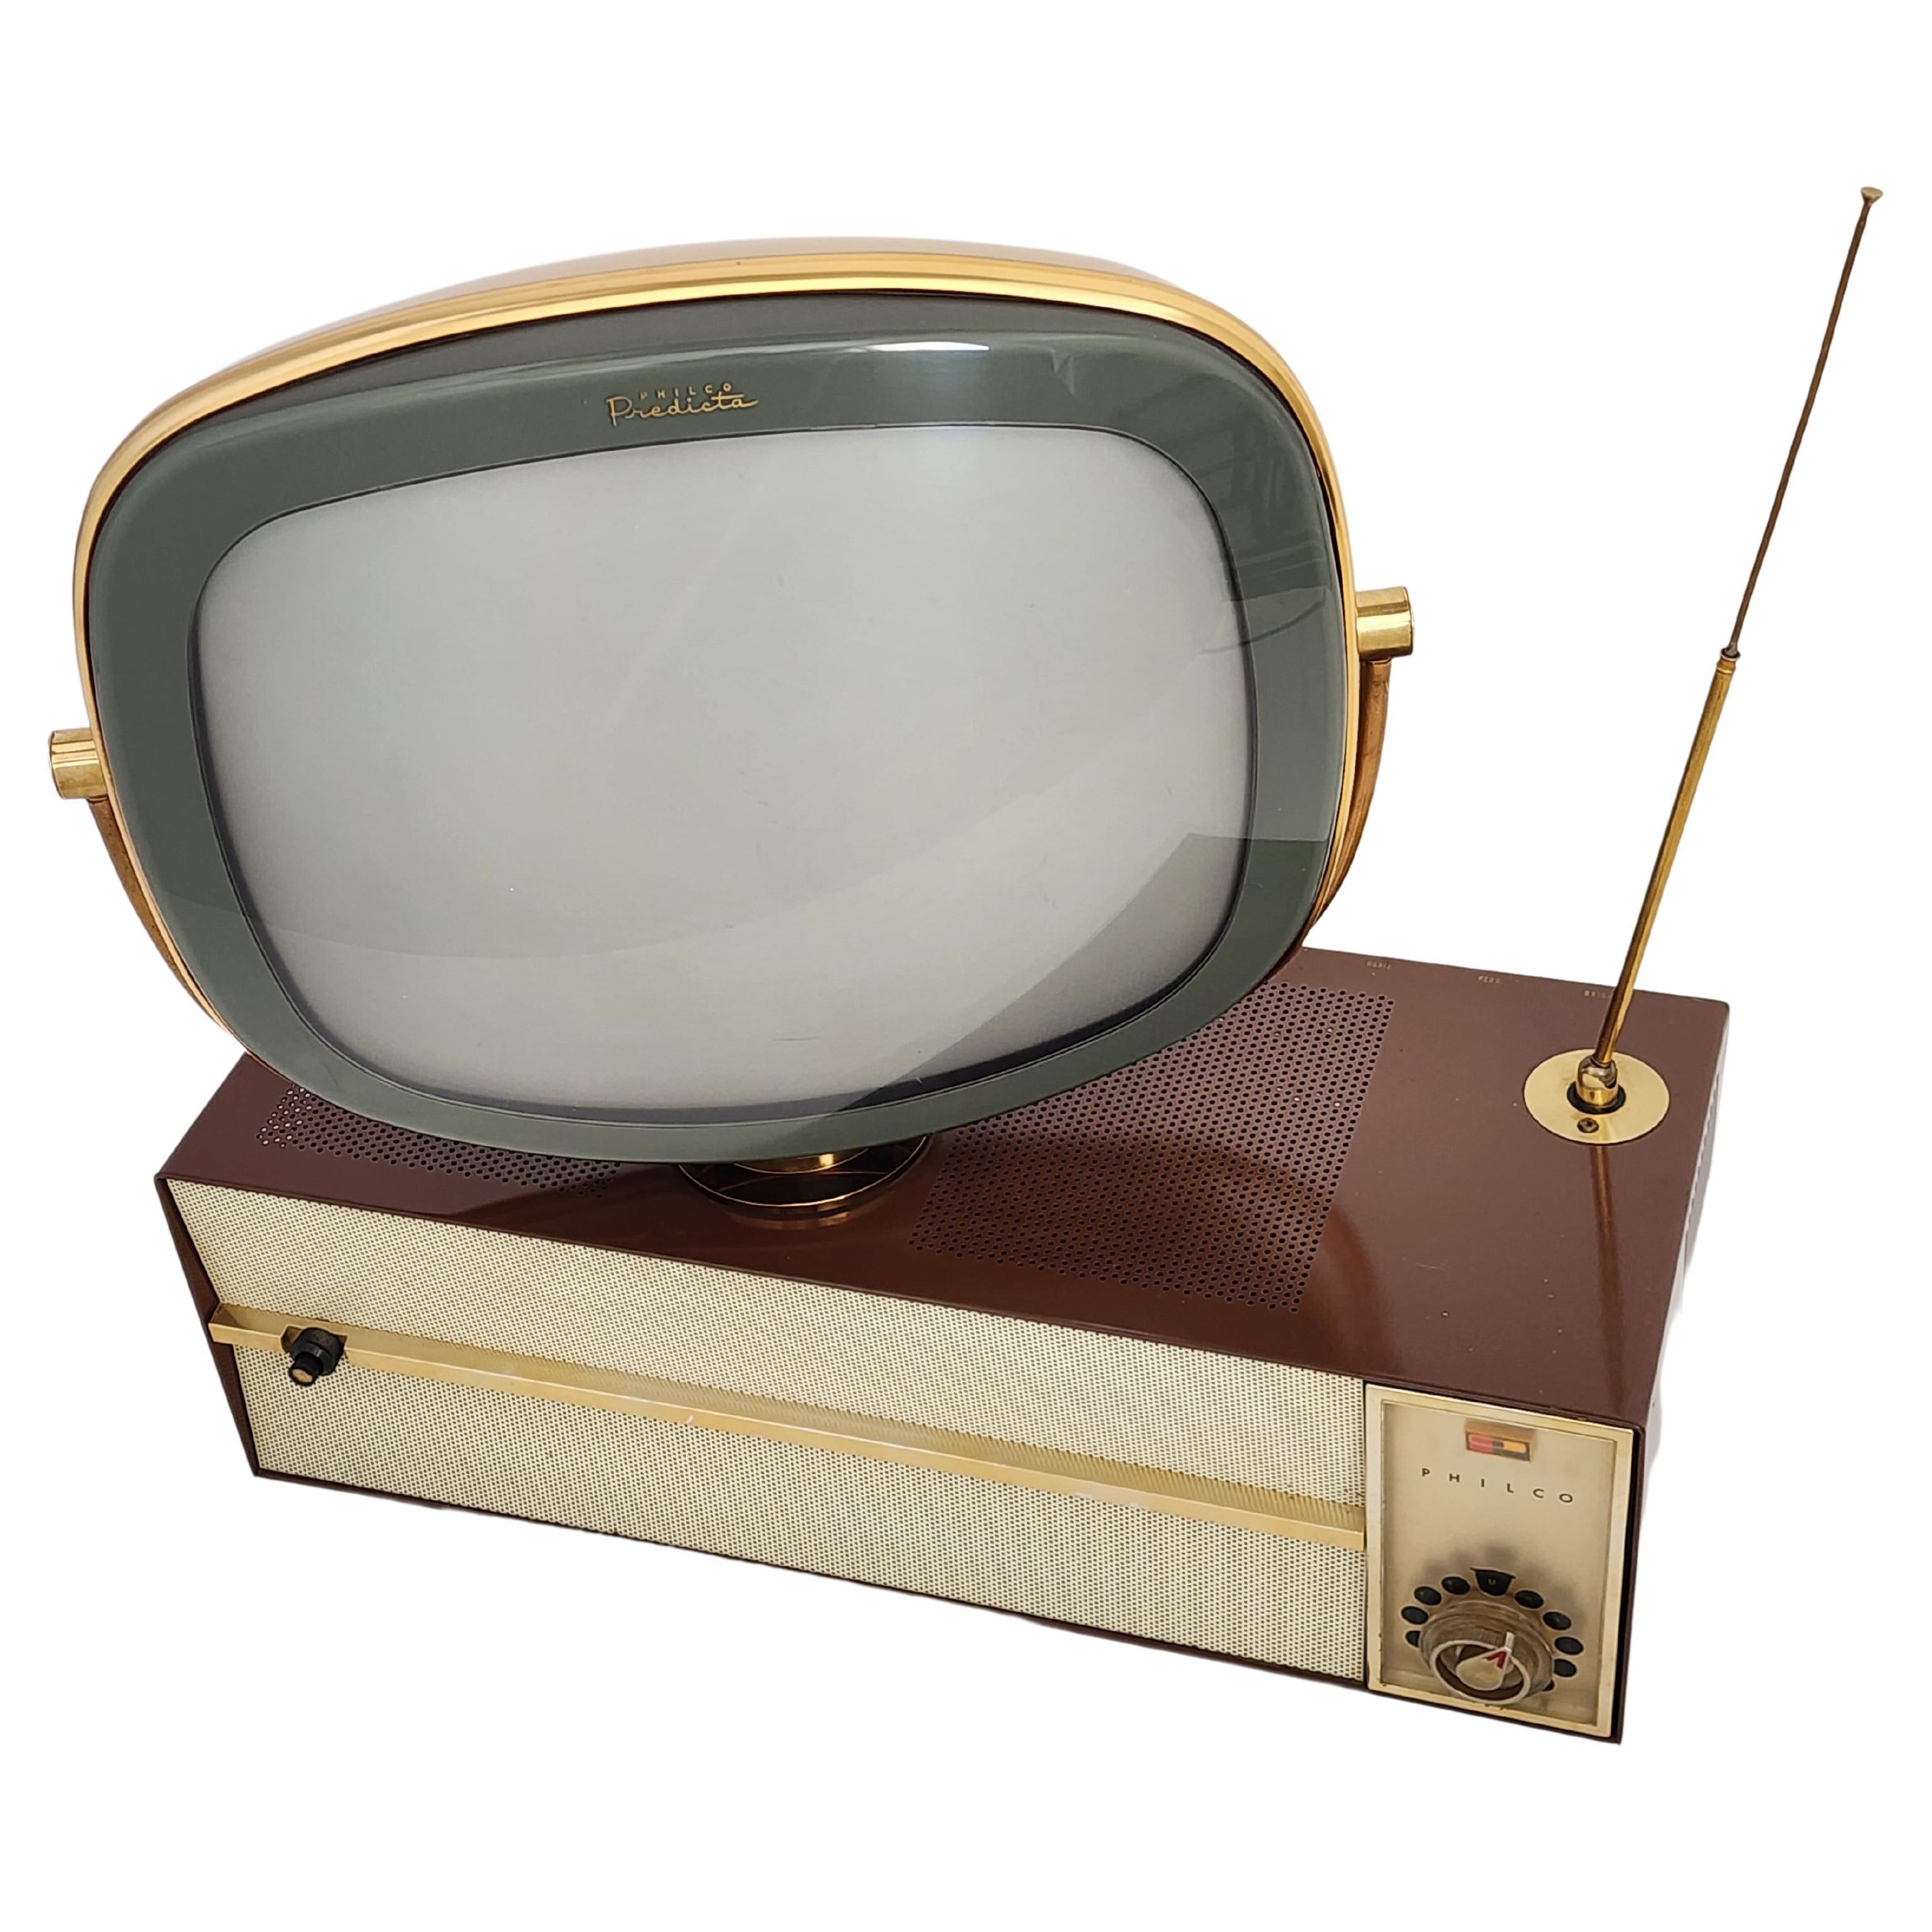 Fully functional iconic Predicta television made by Philco in 1958.

Designers ; Catherine Winkler , Richard Whipple and Severin Jonnaffen. 

Model ' Princess' 3410.

All is original , in great condition and in working order. 

Screen pivot 360